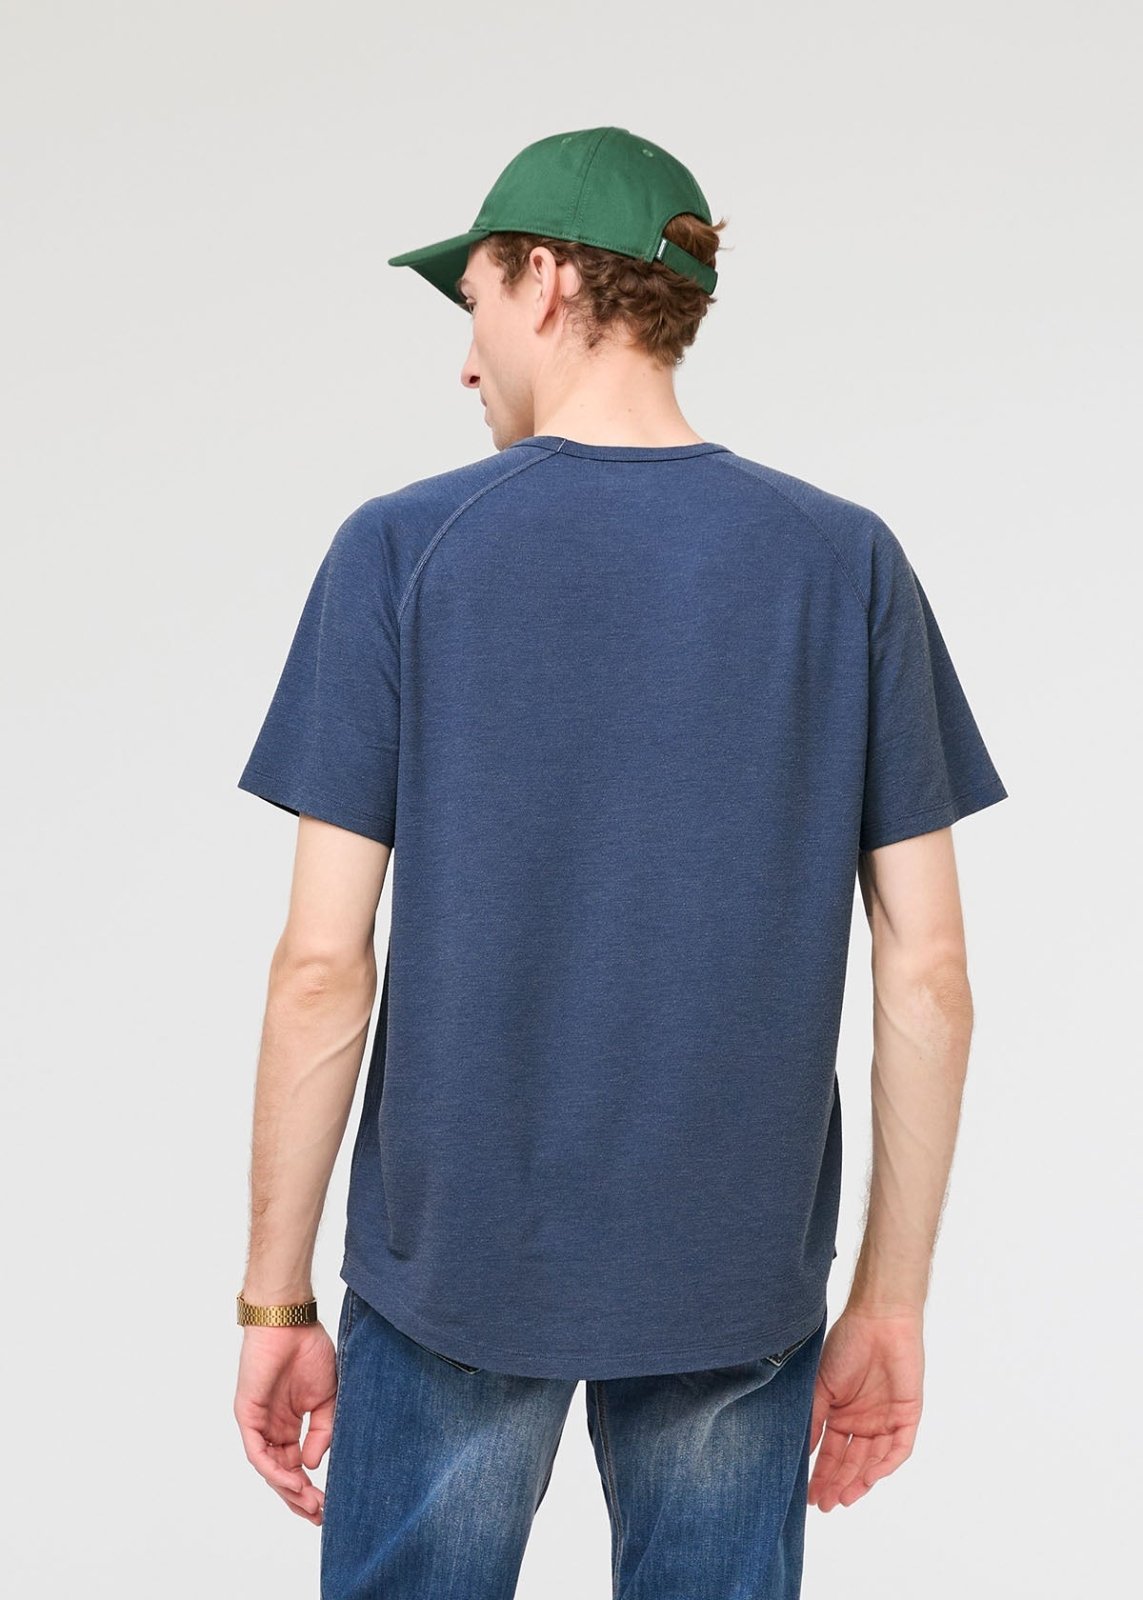 mens breathable navy tee back